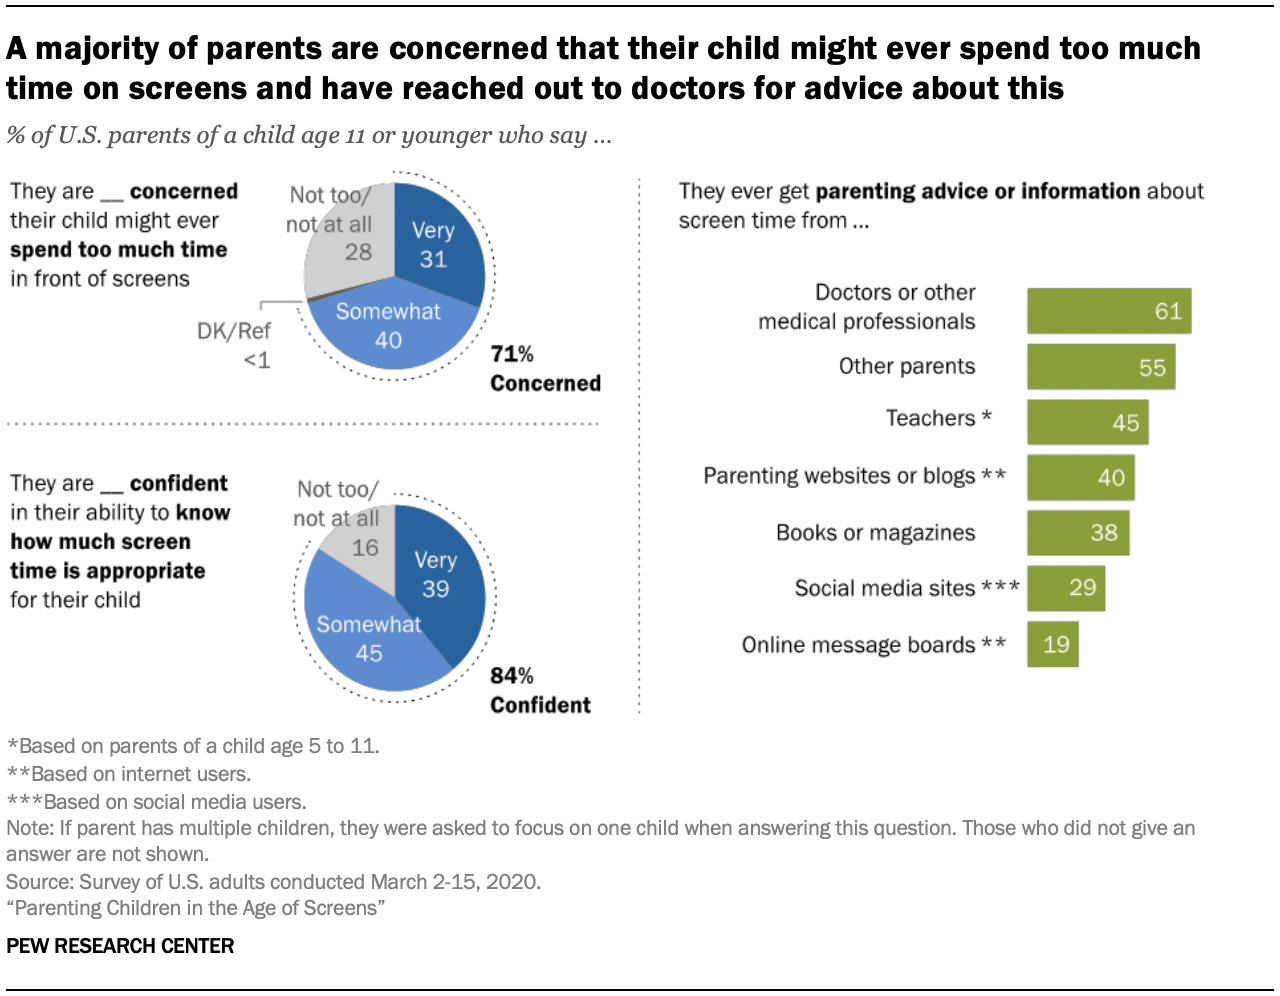 Parenting Kids in the Age of Screens, Social Media and Digital Devices |  Pew Research Center